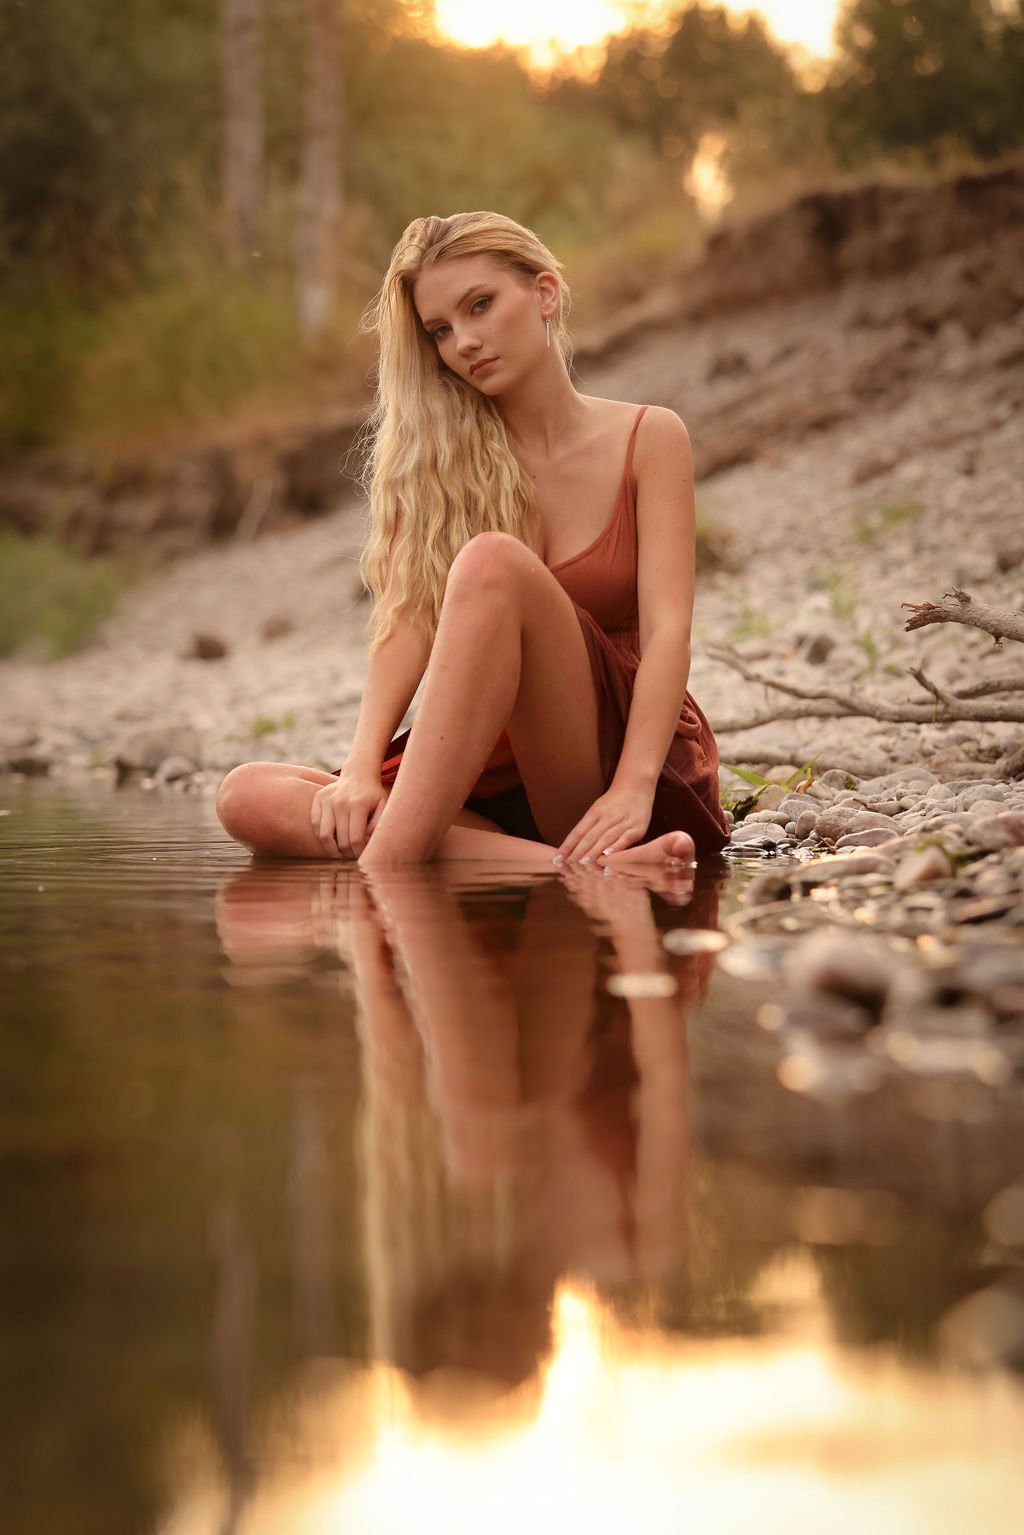 Missoula high school senior by river with reflection in water.jpg